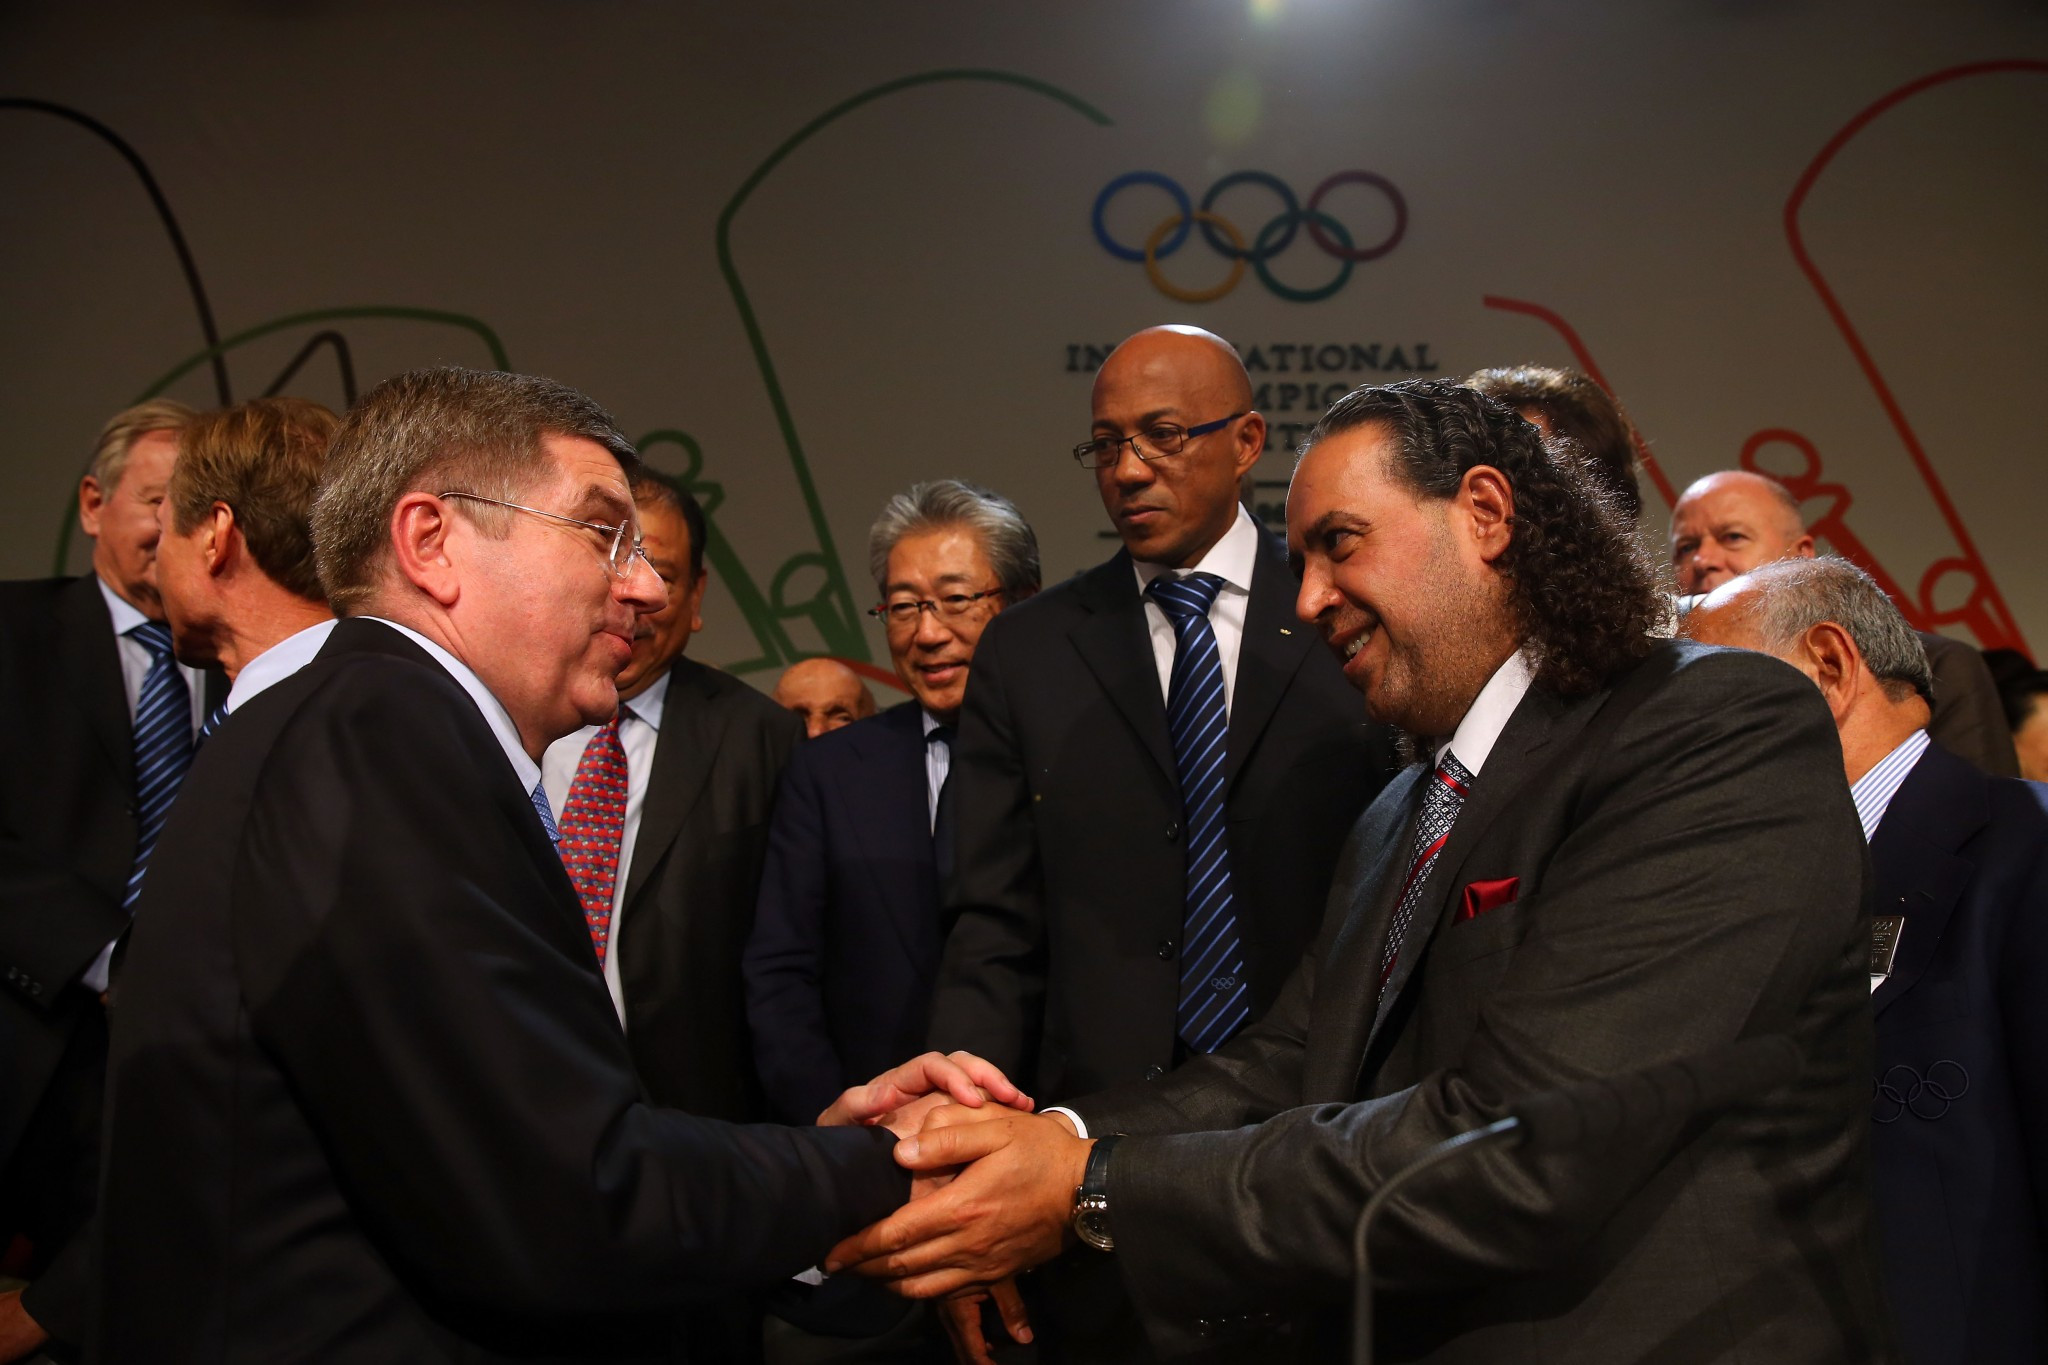 Sheikh Ahmad Al-Fahad Al-Sabah, right, was the key backer of Thomas Bach at the IOC Session in Buenos Aires ©Getty Images